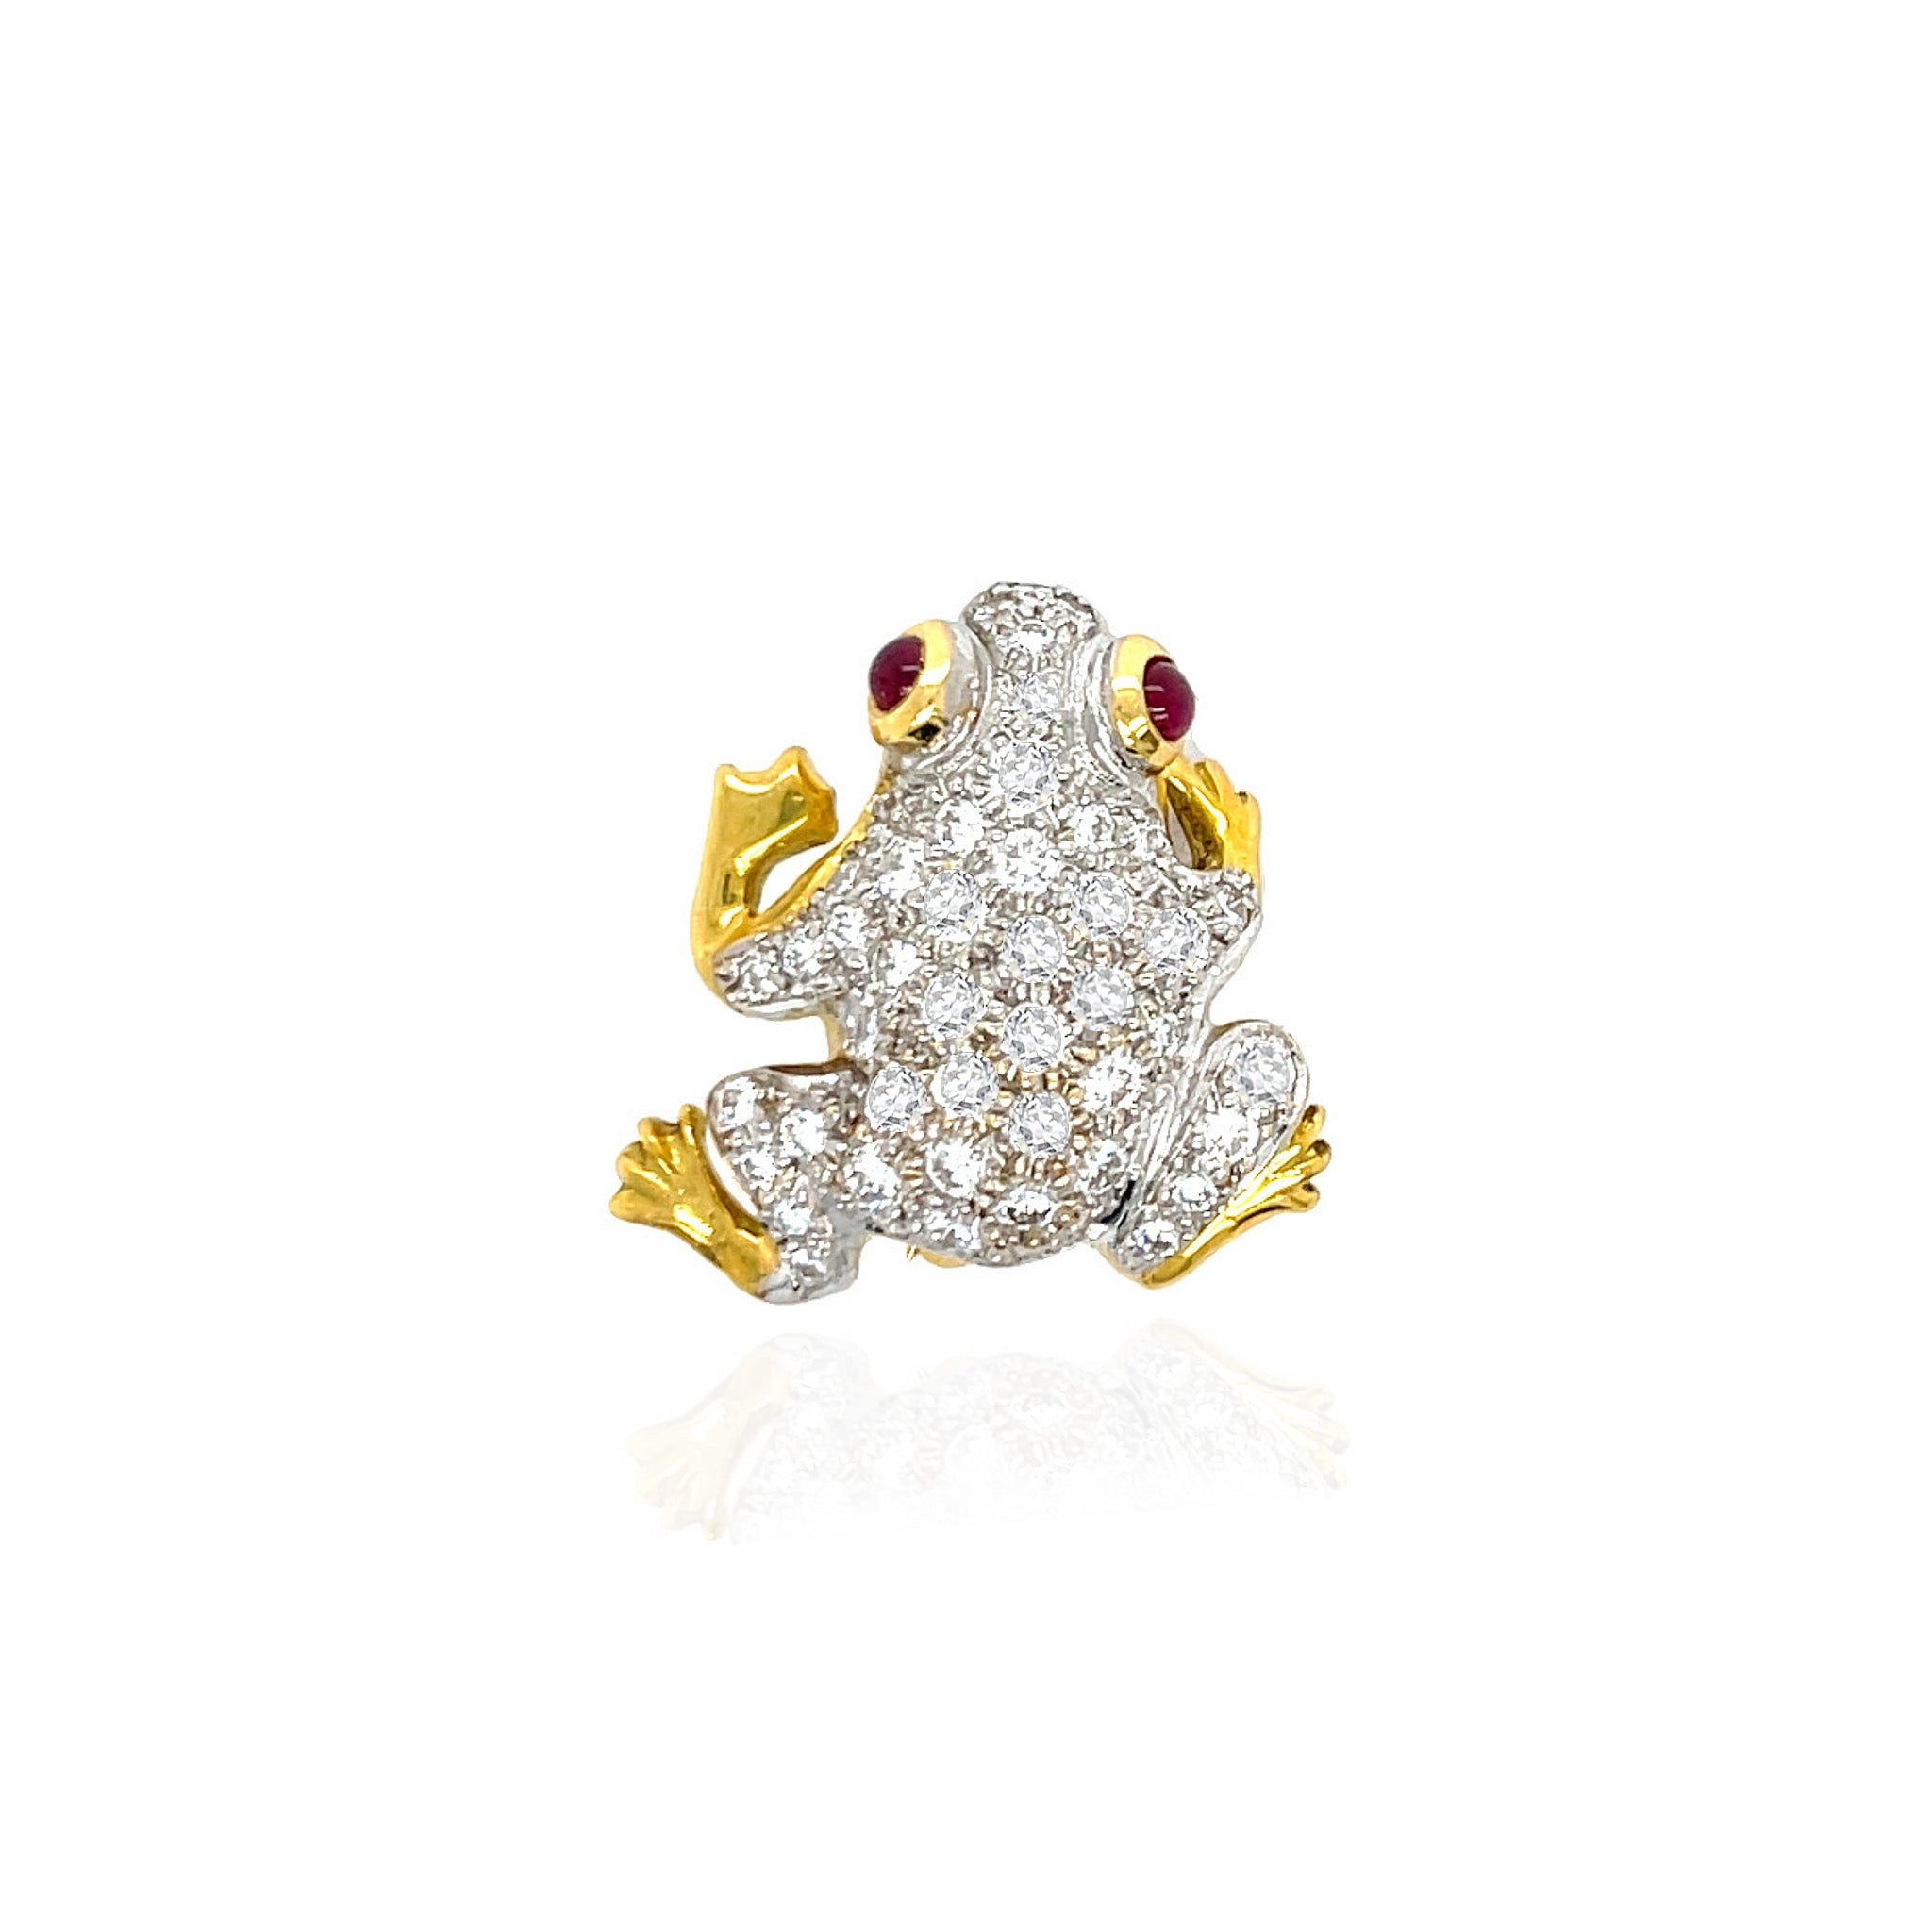 Diamond and Ruby Frog Brooch